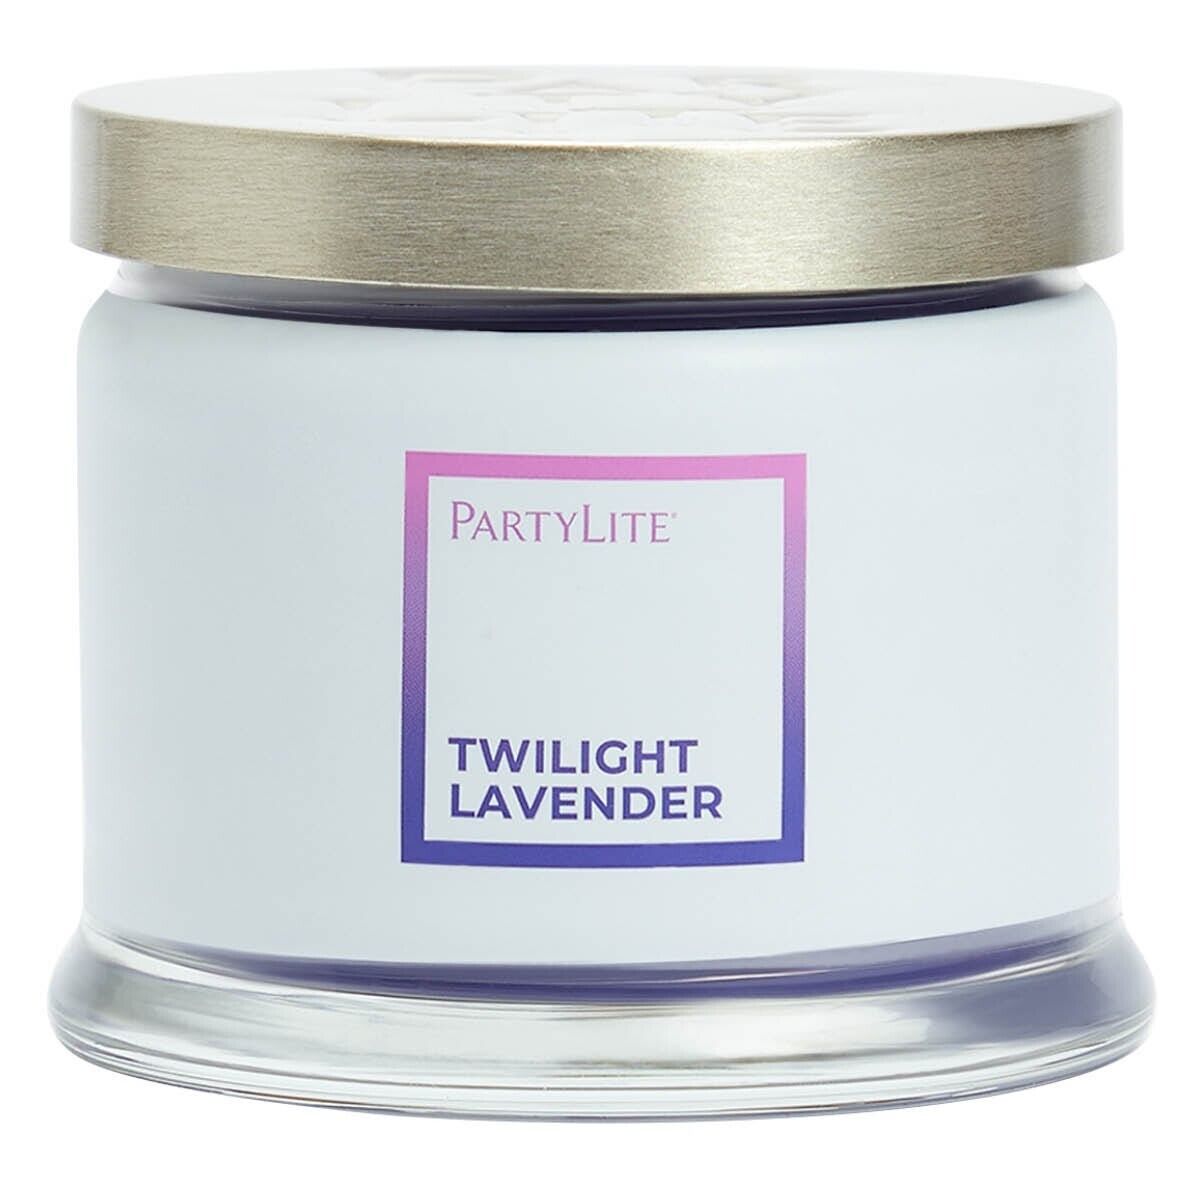 Partylite TWILIGHT LAVENDER 3-wick JAR CANDLE  BRAND NEW